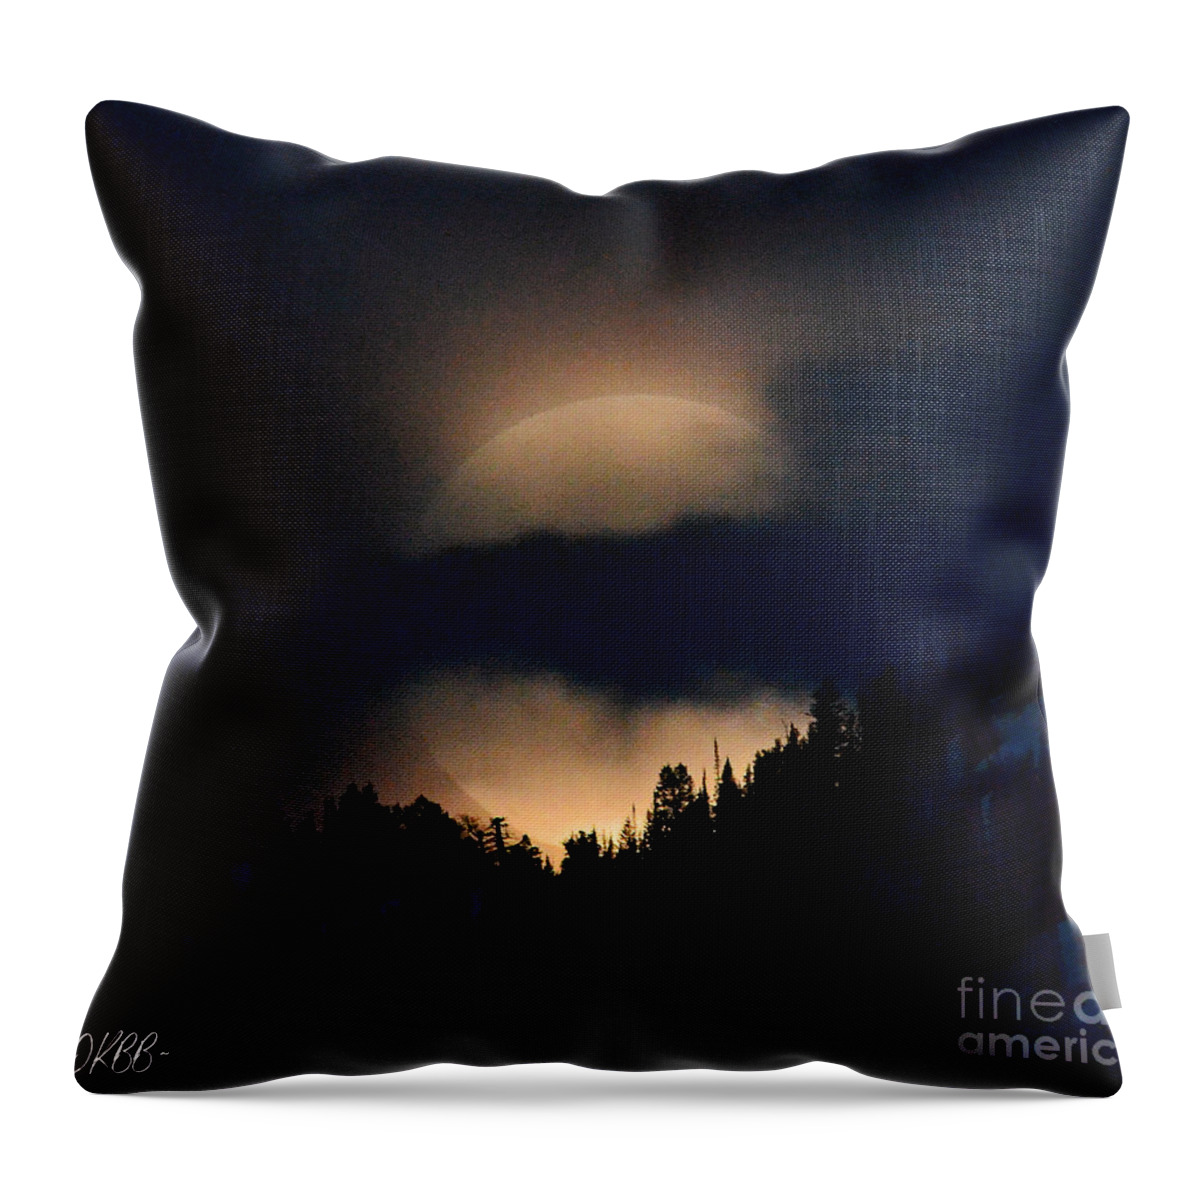 Full Moon Throw Pillow featuring the photograph Full Flower Moon #5 by Dorrene BrownButterfield